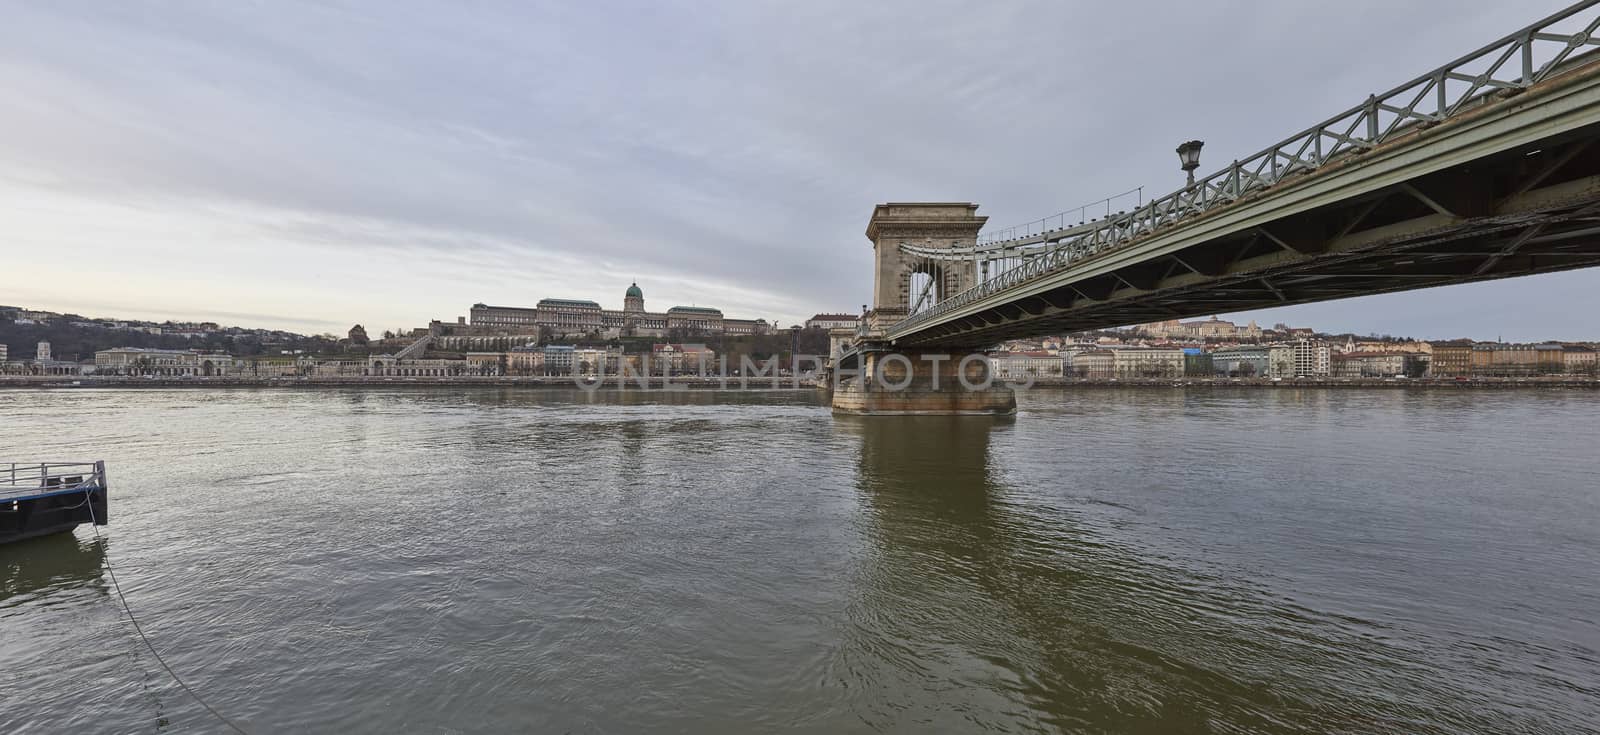 Composite panoramic low angle shot of Szechenyi Chain Bridge with riverbed rocks in the foreground and Buda Castle in the background, accross Danube River. February 02, 2016 in Budapest, Hungary.